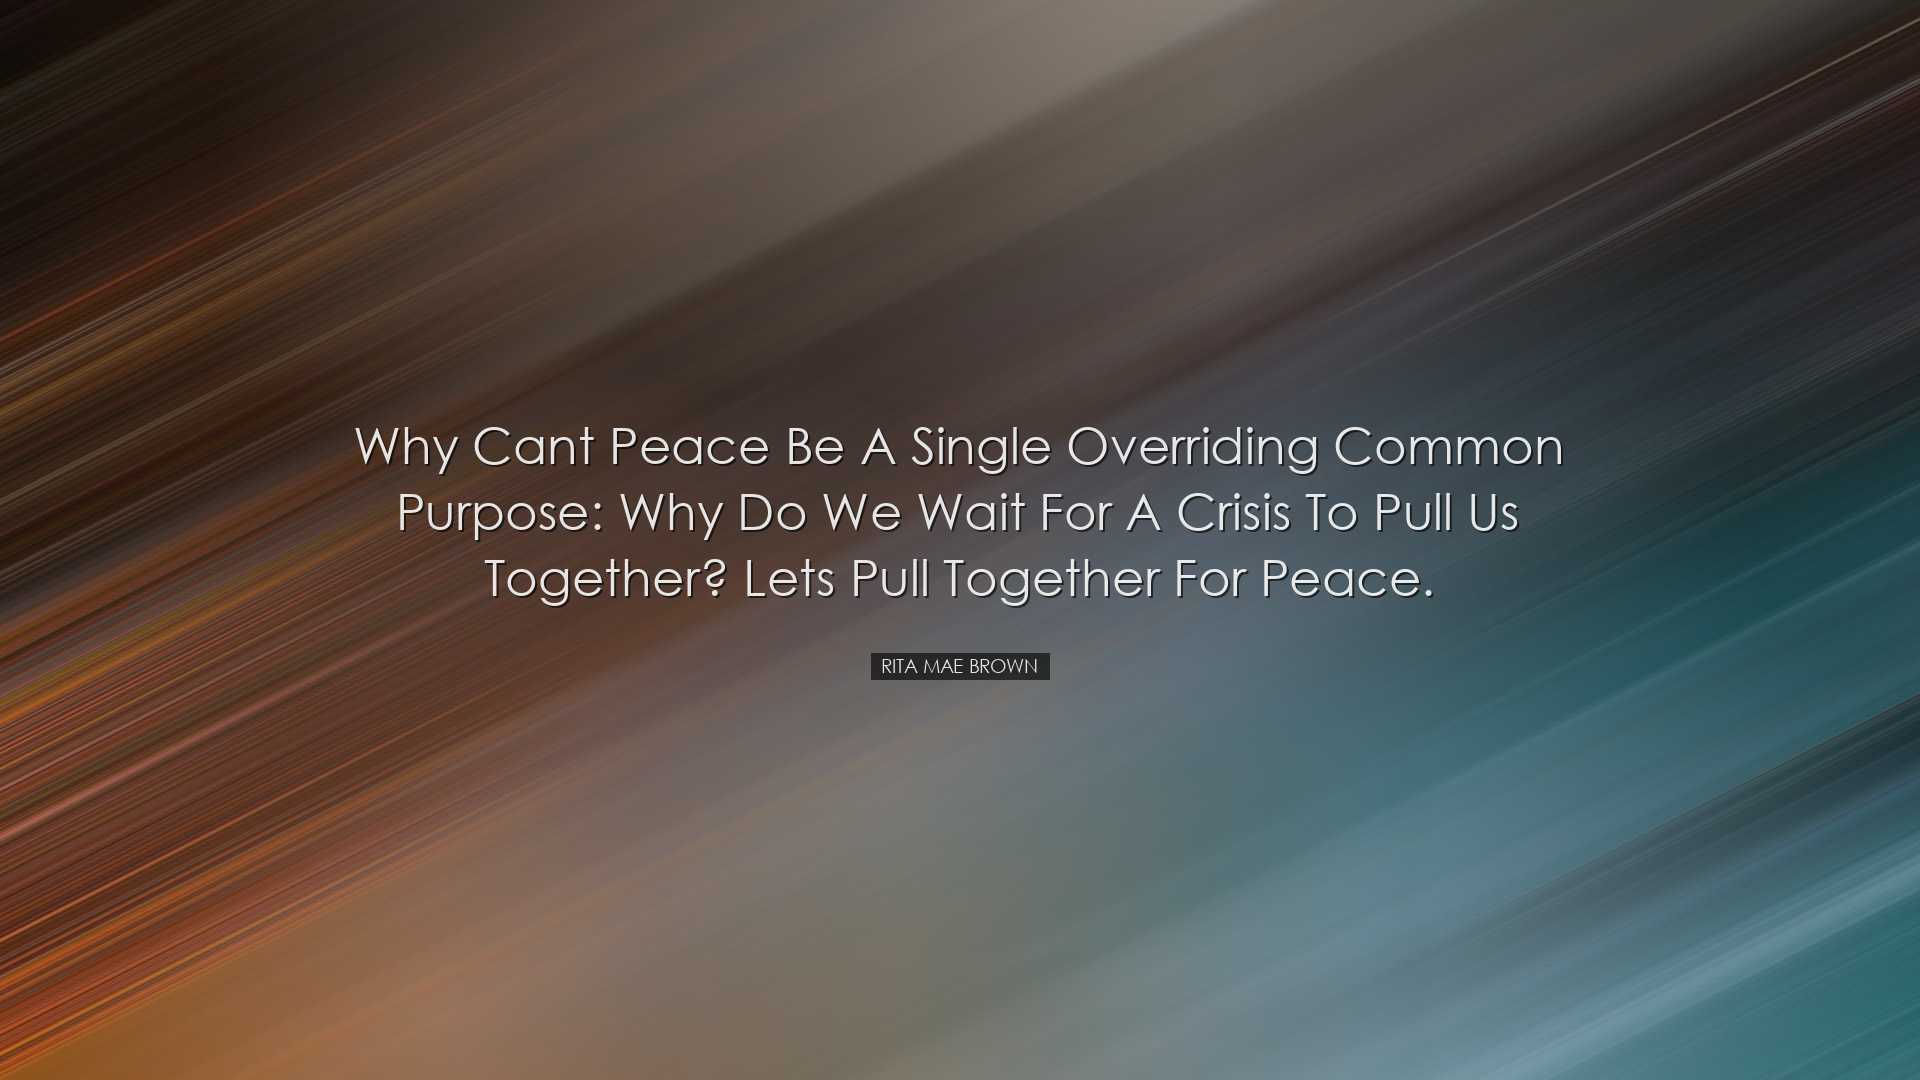 Why cant peace be a single overriding common purpose: why do we wa